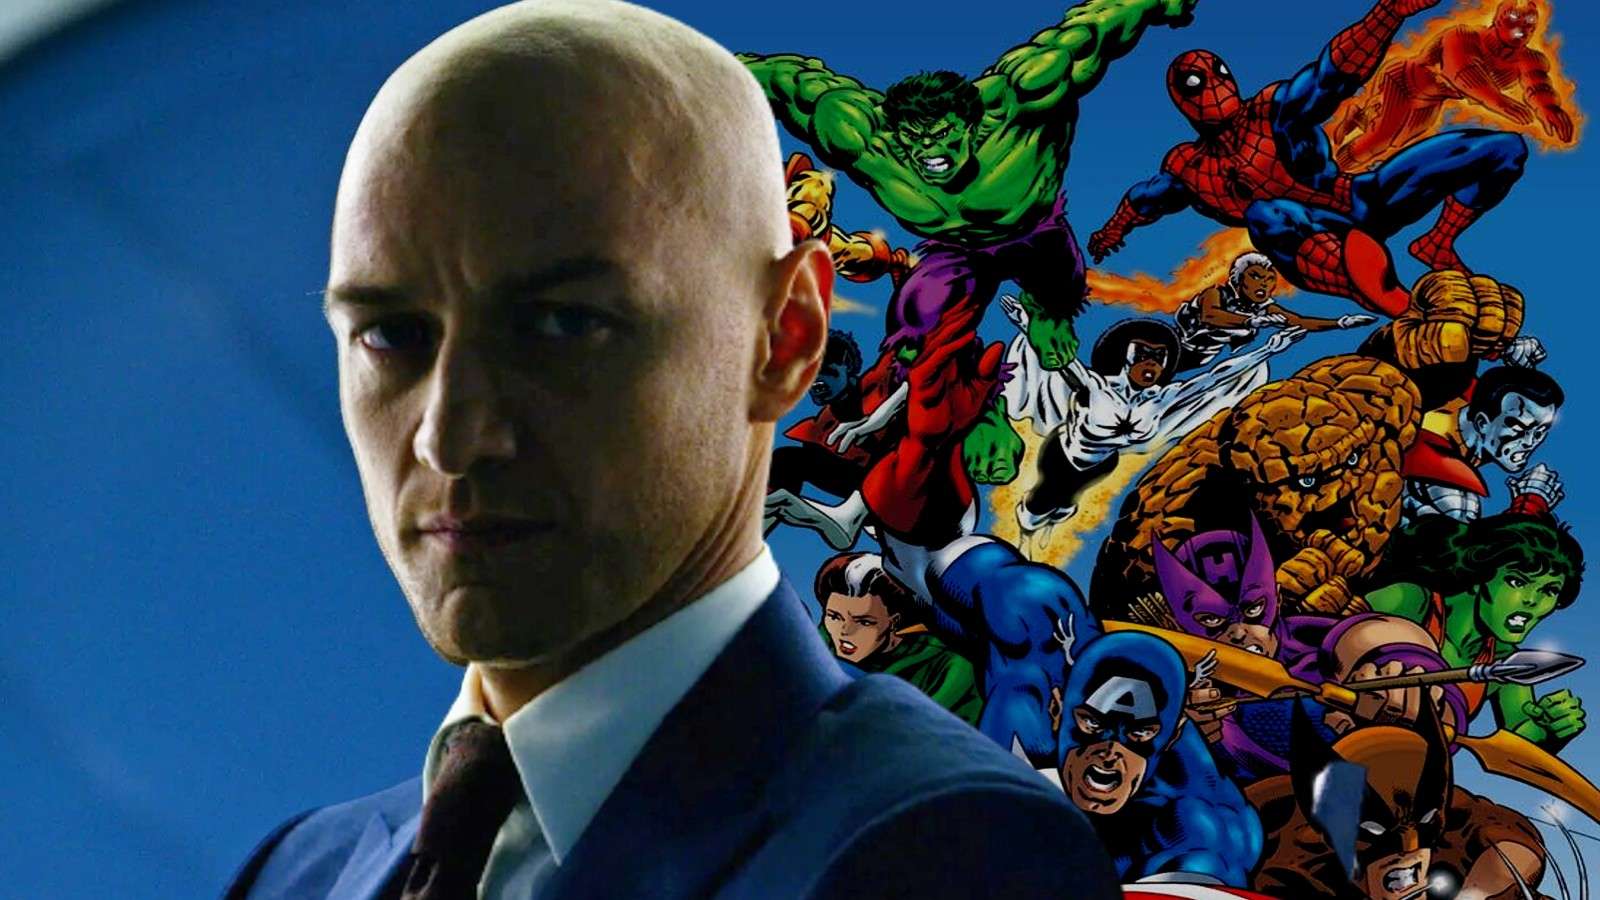 James McAvoy as Professor X and a still from the Avengers: Secret Wars comic